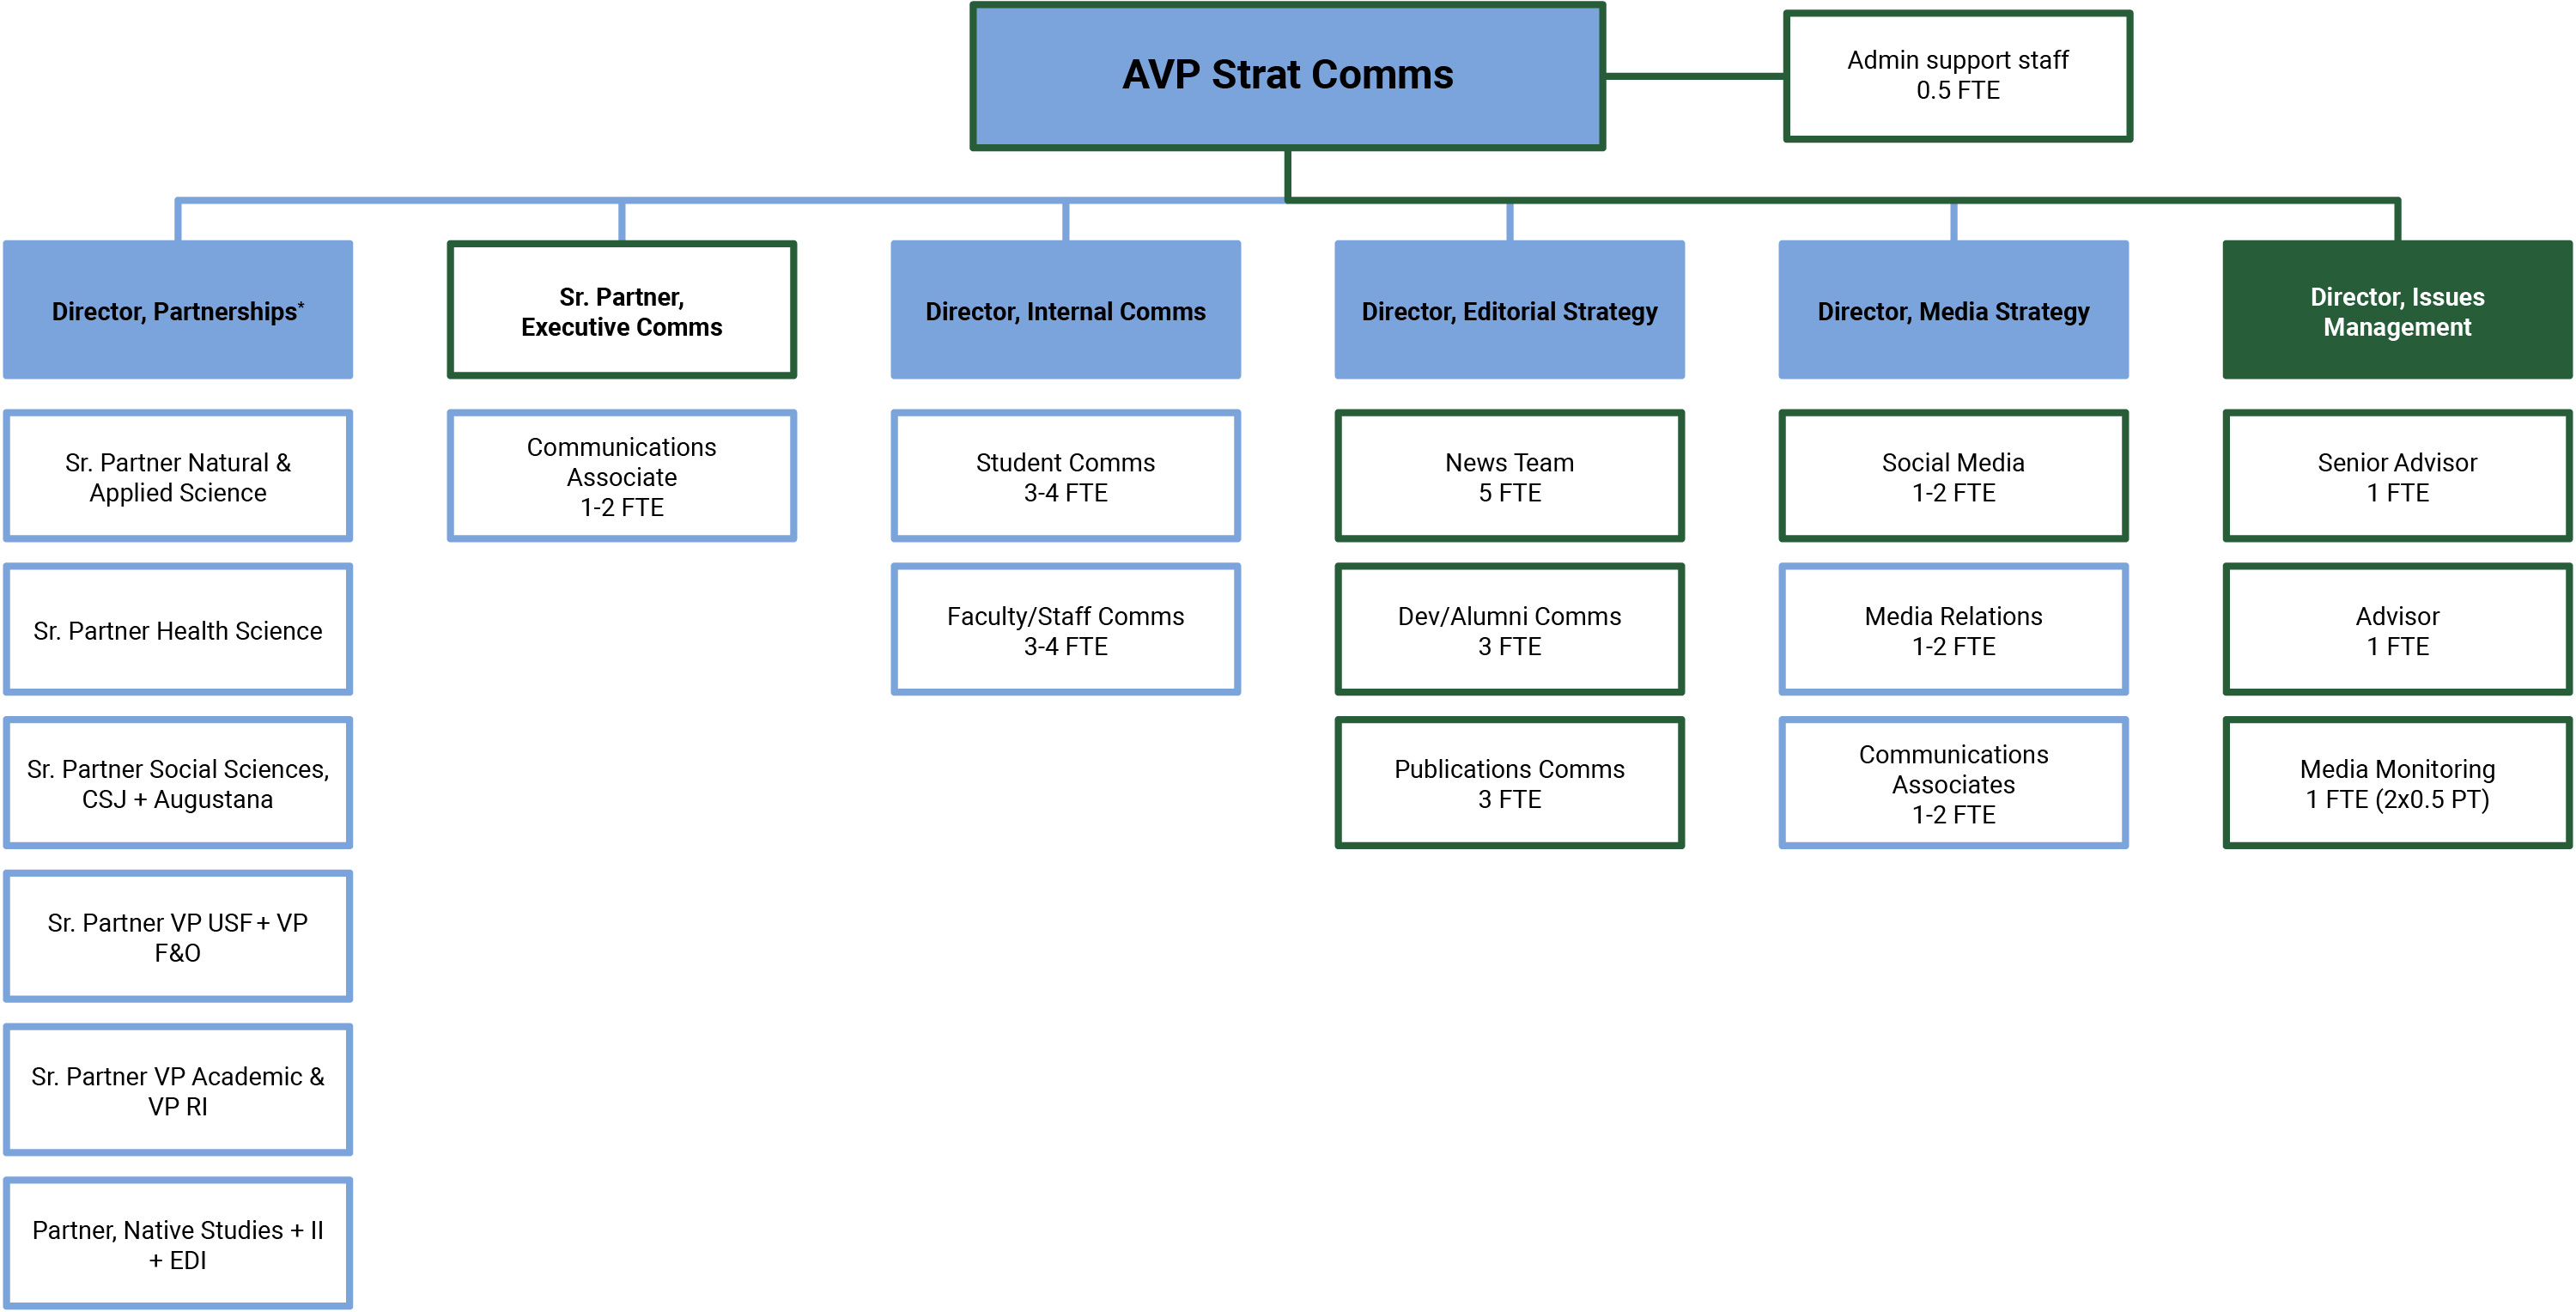 Structure for the AVP Communications unit